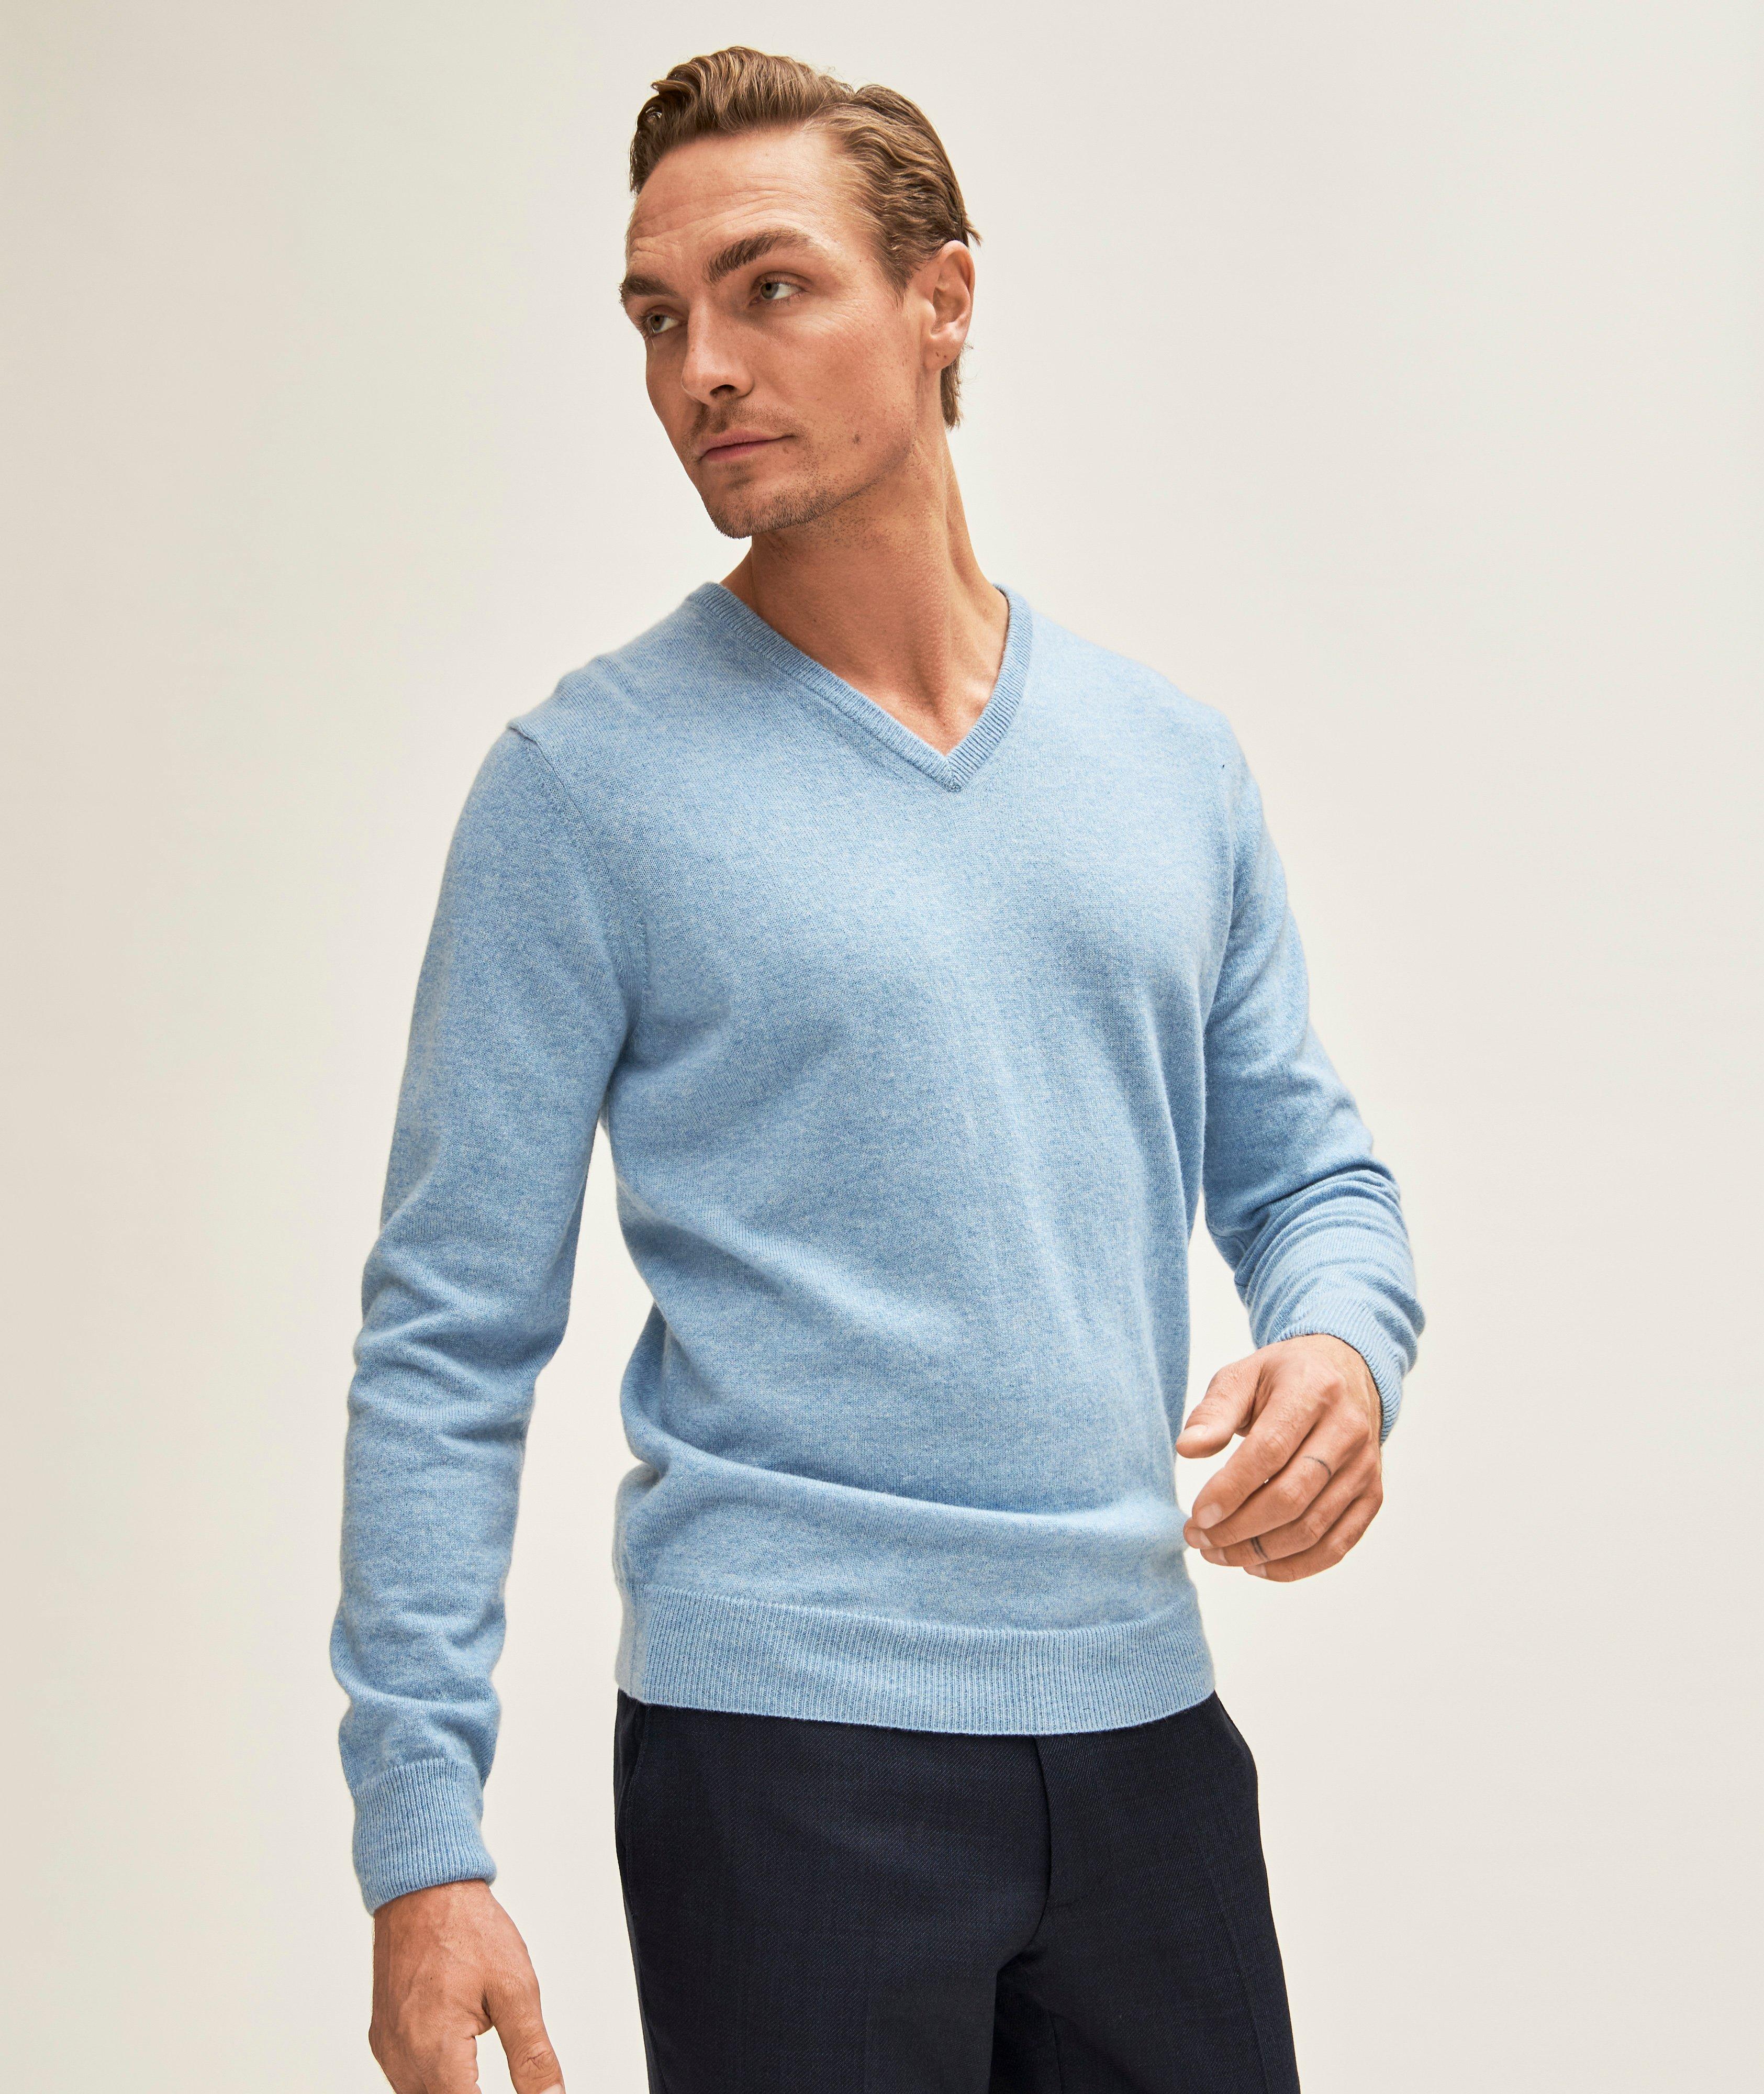 Harold Cashmere V Neck Sweater | Sweaters & Knits | Final Cut